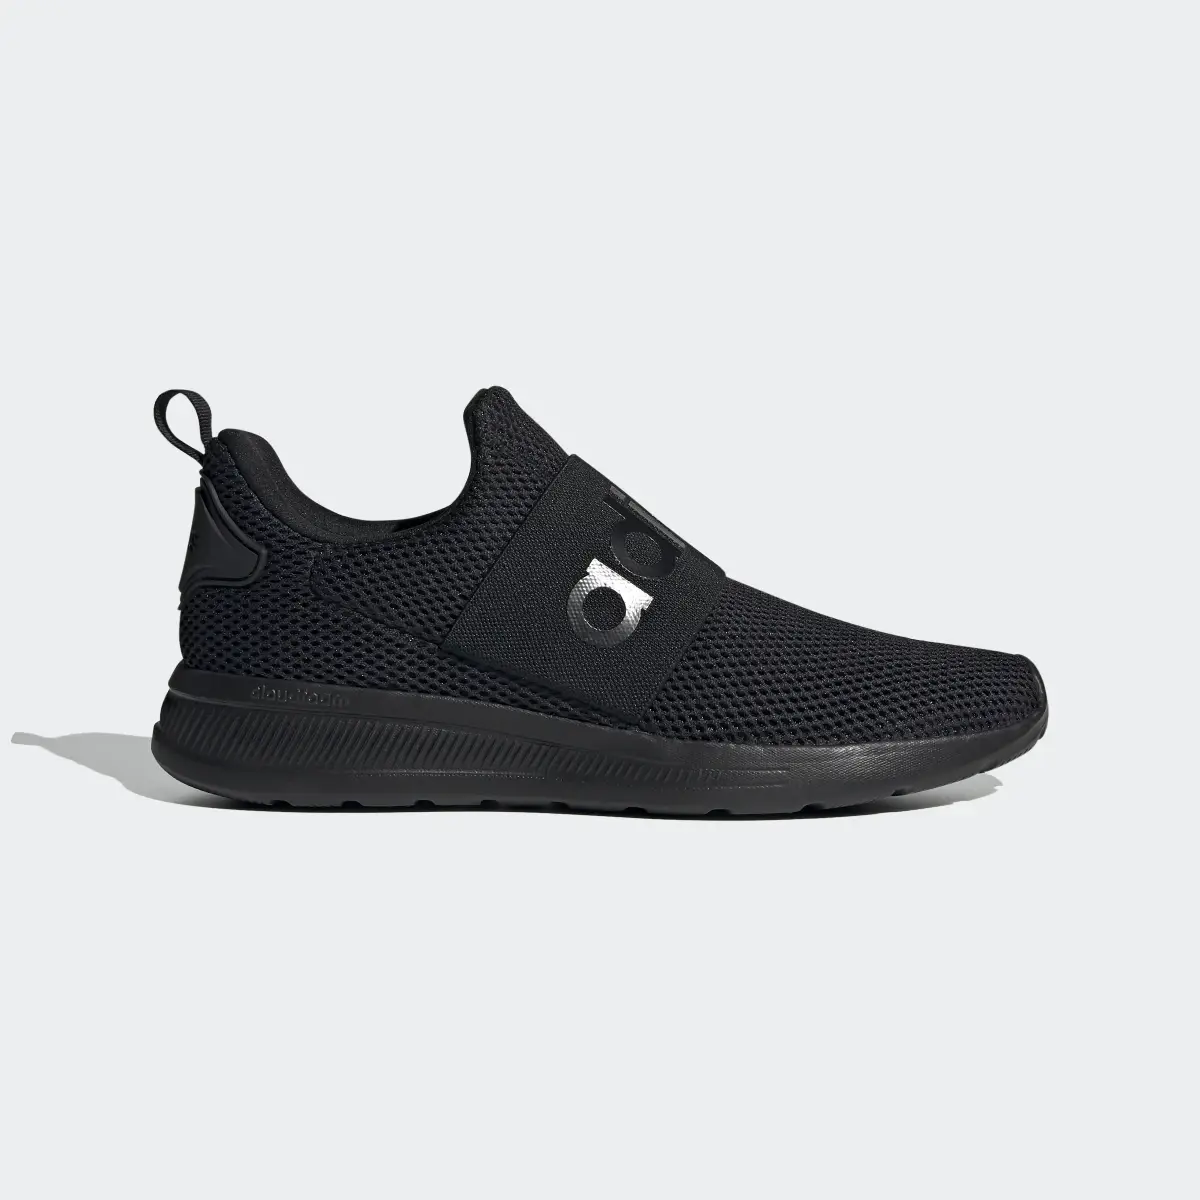 Adidas Lite Racer Adapt 4.0 Shoes. 2